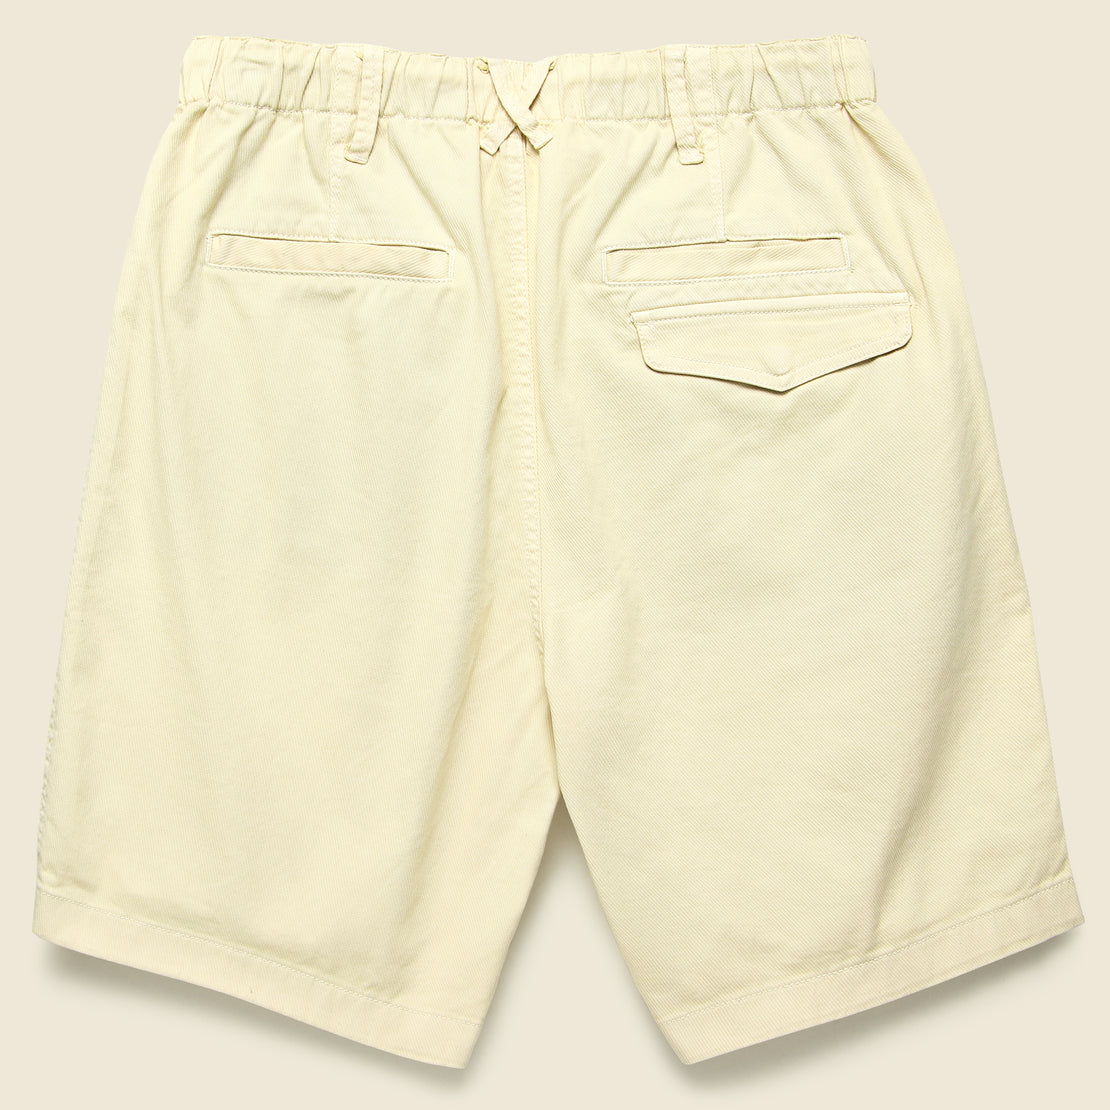 Pull-On Button Fly Shorts - Oat Milk - Alex Mill - STAG Provisions - Shorts - Solid